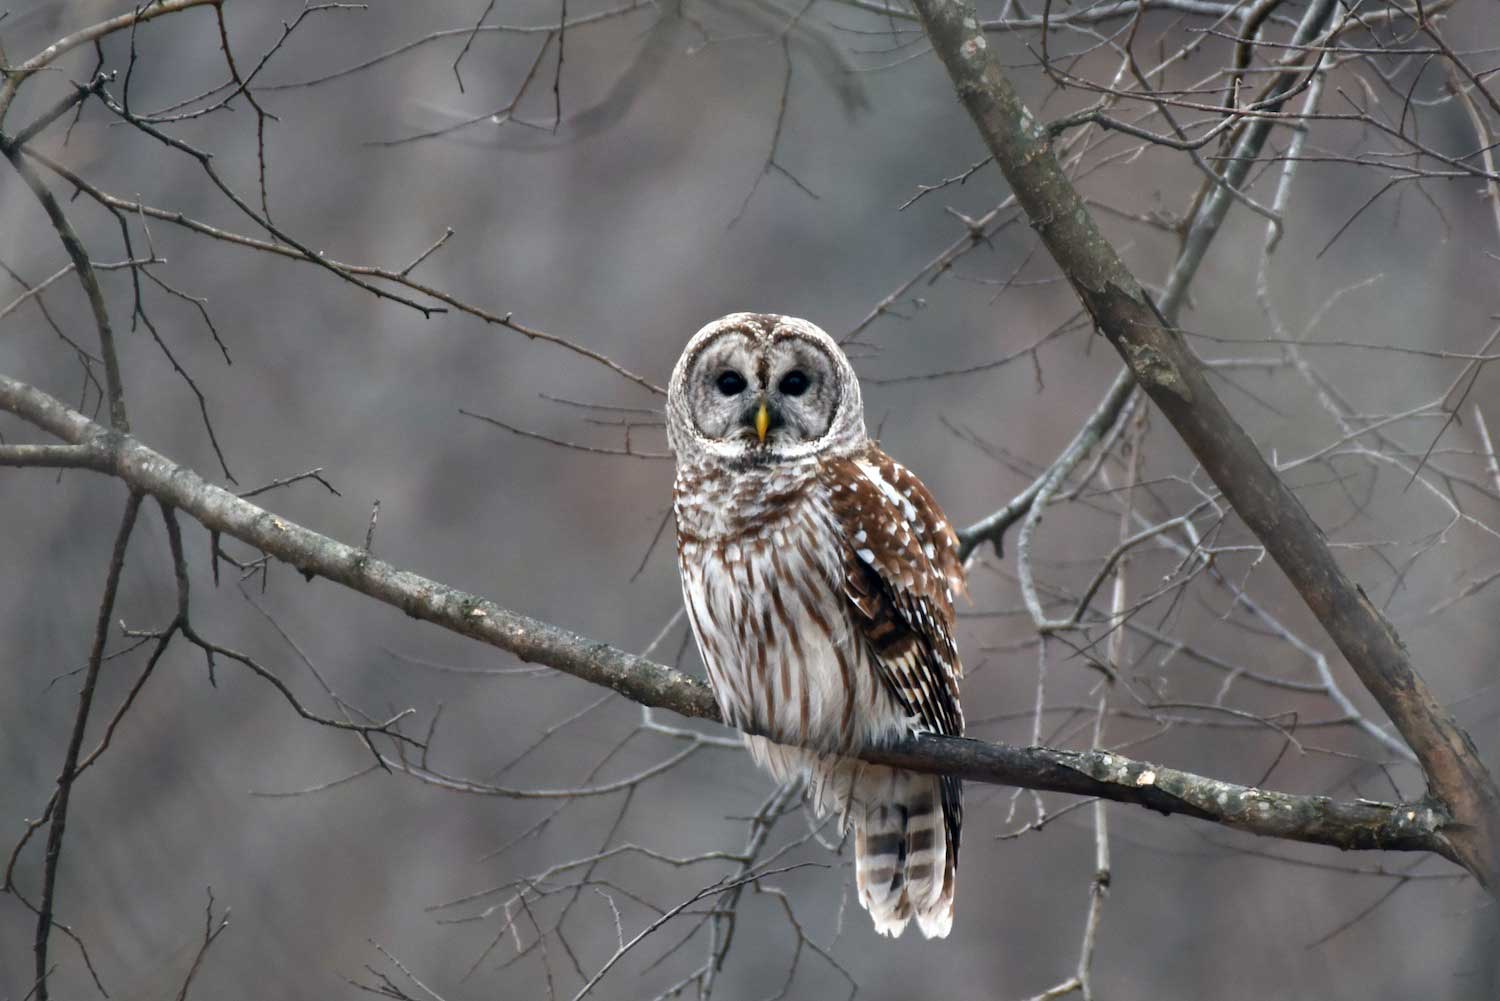 A barred owl on a bare tree branch.